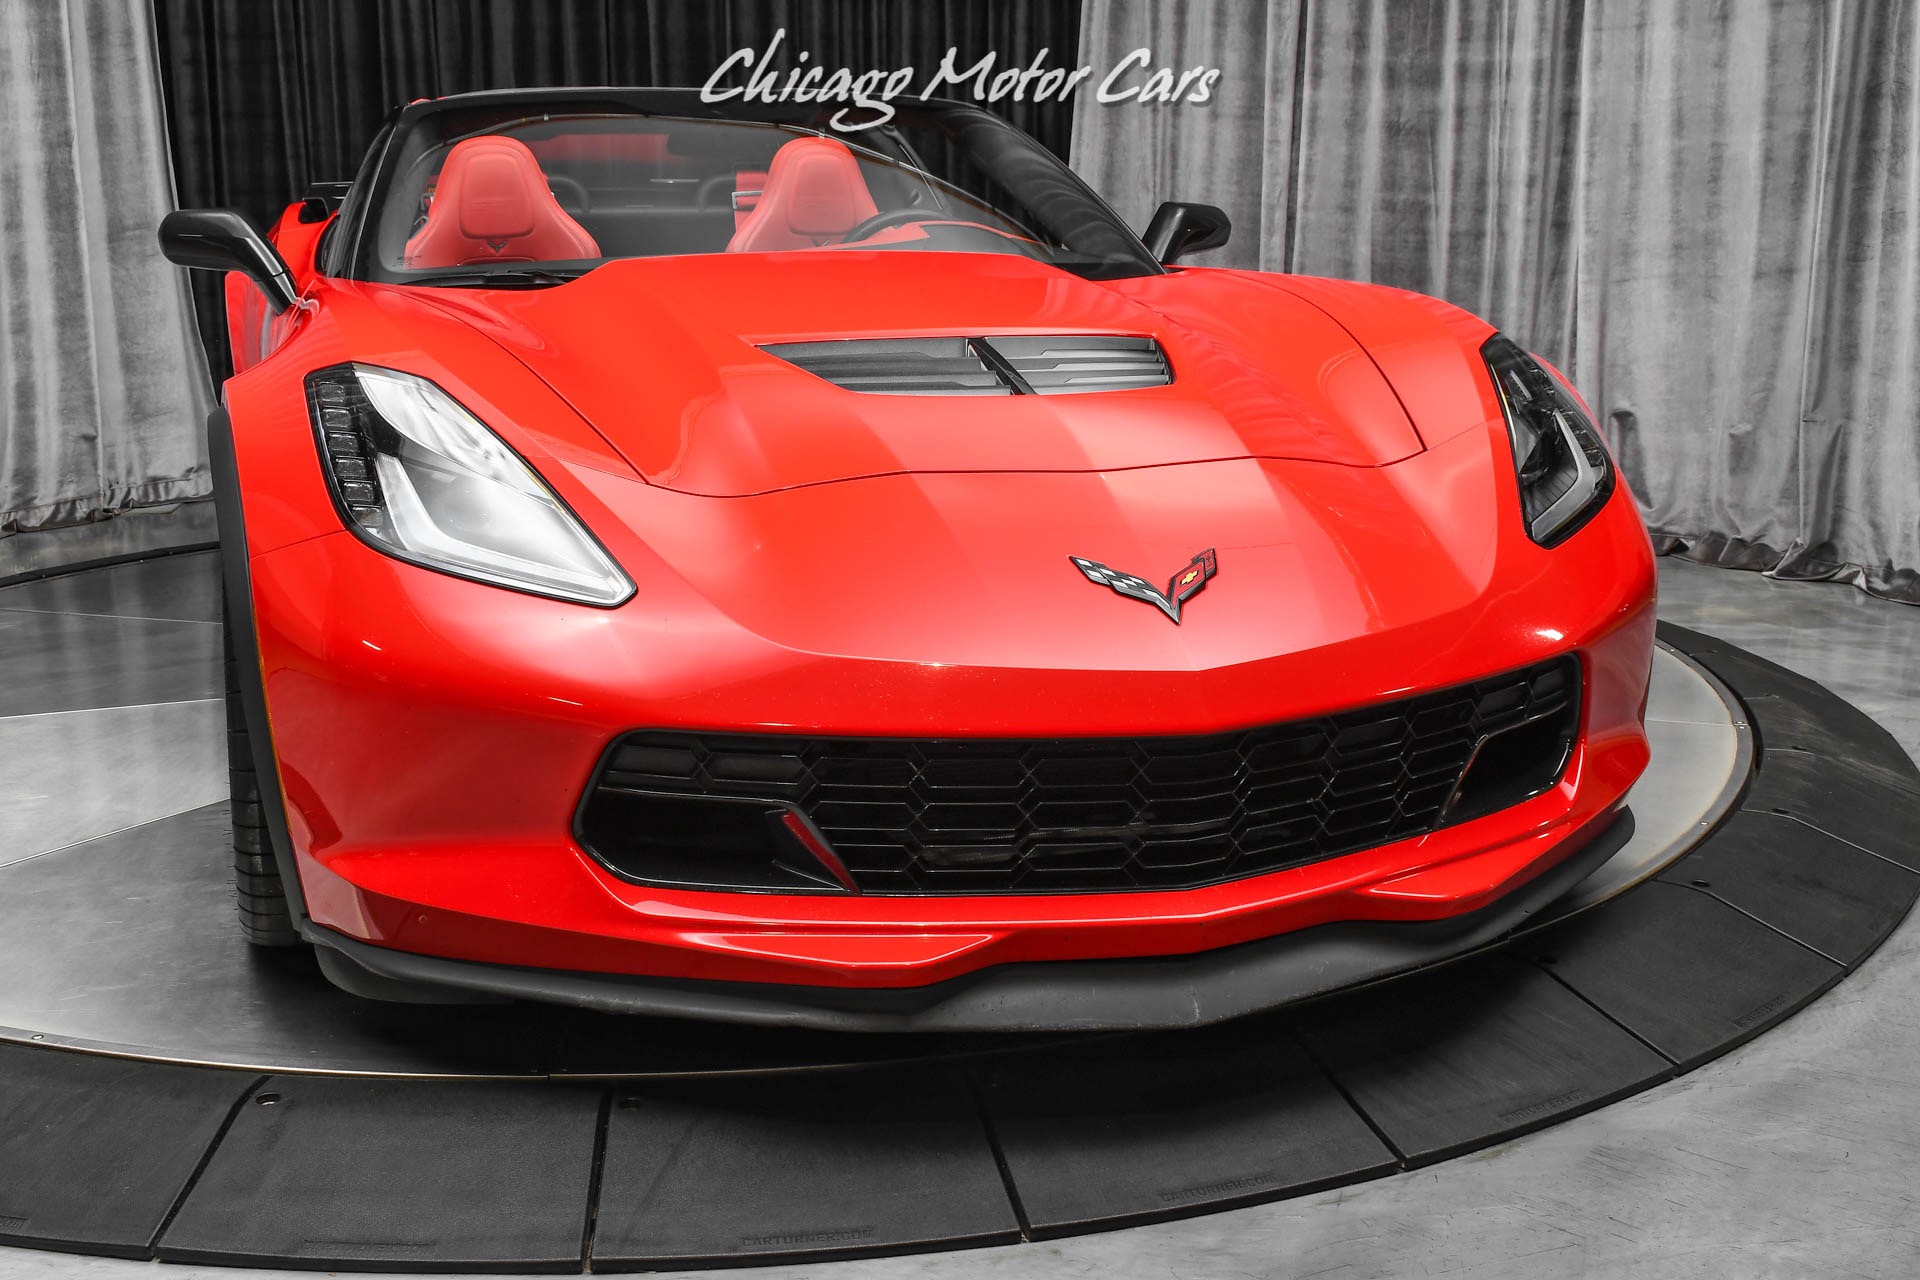 Used-2015-Chevrolet-Corvette-Z06-3LZ-Coupe-7-Speed-Manual-Hot-Color-Highly-Equipped-ONLY-12K-Miles